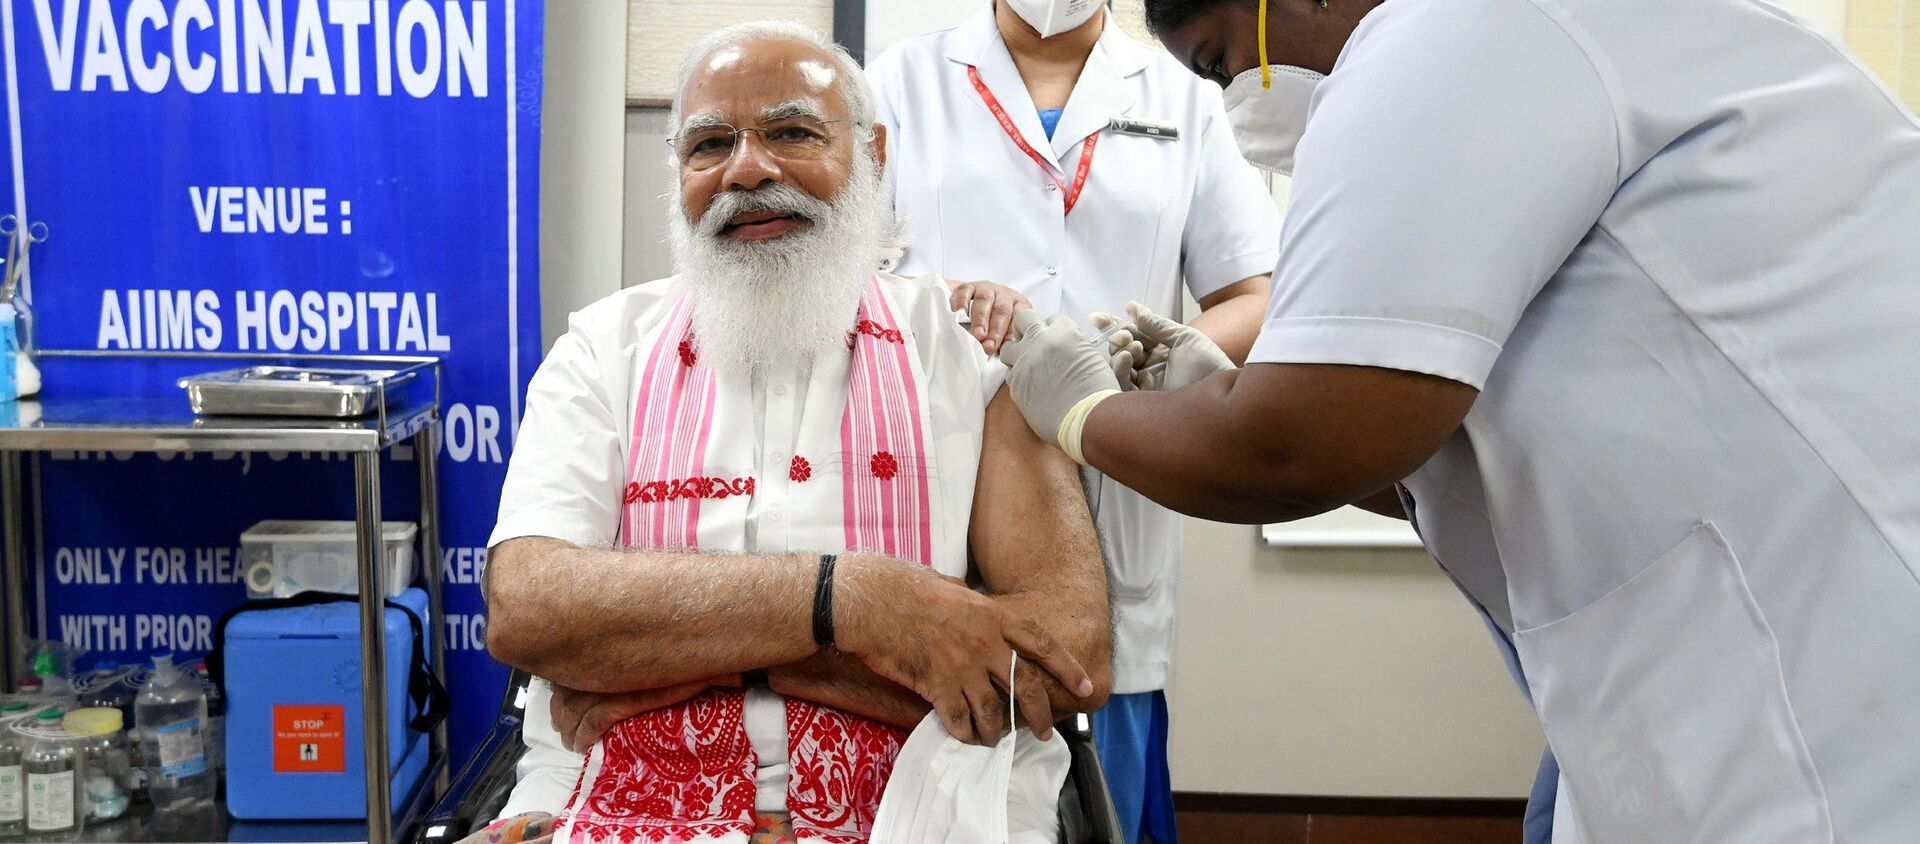 India's Prime Minister Narendra Modi receives a dose of COVAXIN, a coronavirus disease (COVID-19) vaccine developed by India's Bharat Biotech and the state-run Indian Council of Medical Research, at All India Institute of Medical Sciences (AIIMS) hospital in New Delhi, India, March 1, 2021 - 俄罗斯卫星通讯社, 1920, 01.03.2021